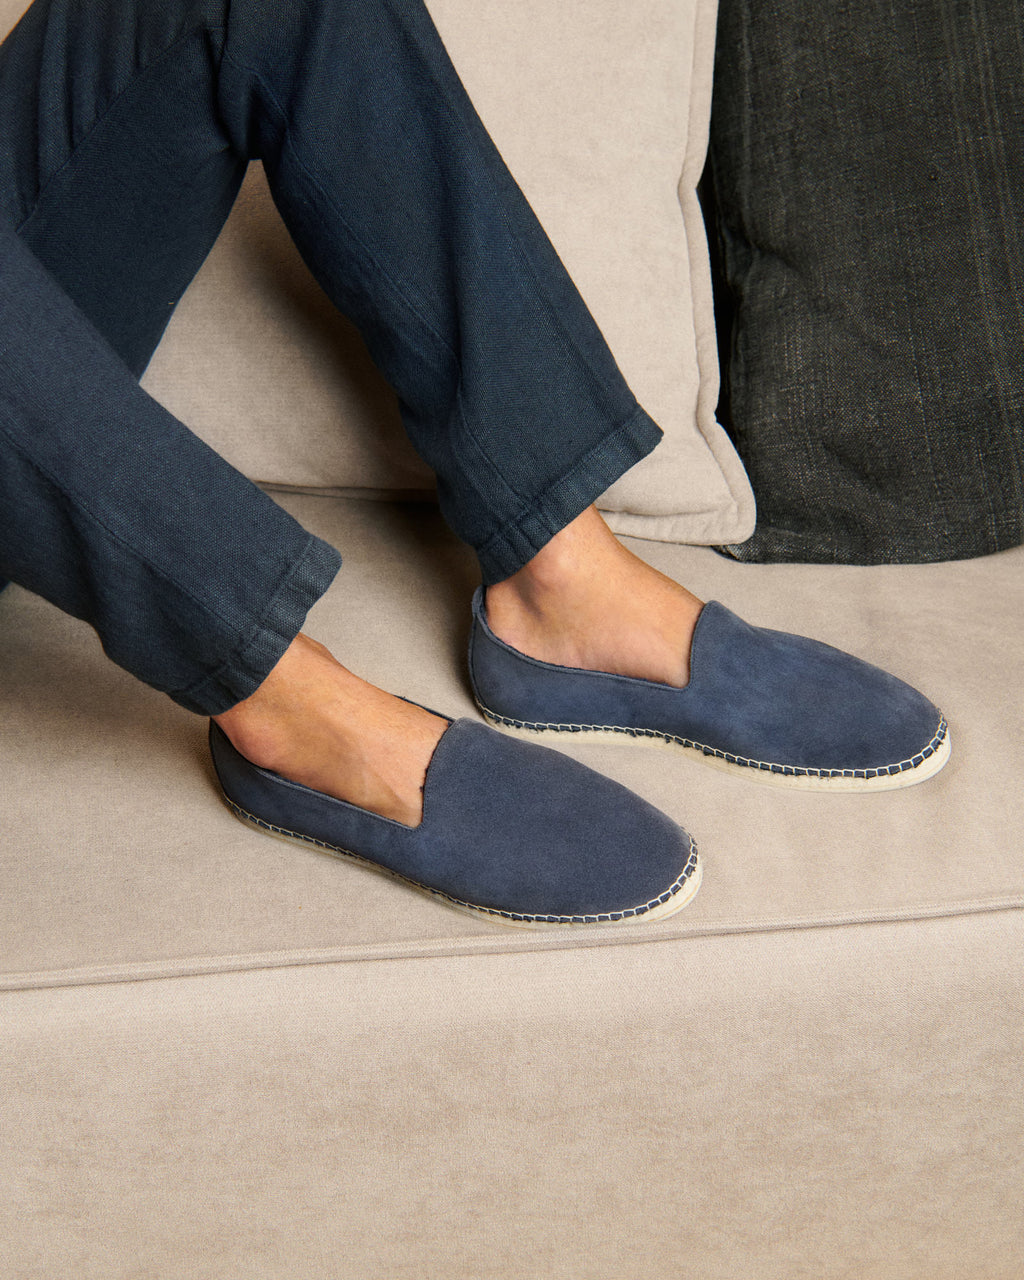 Suede With Faux Fur Flat Espadrilles With Fur - Cortina - Patriot Blue